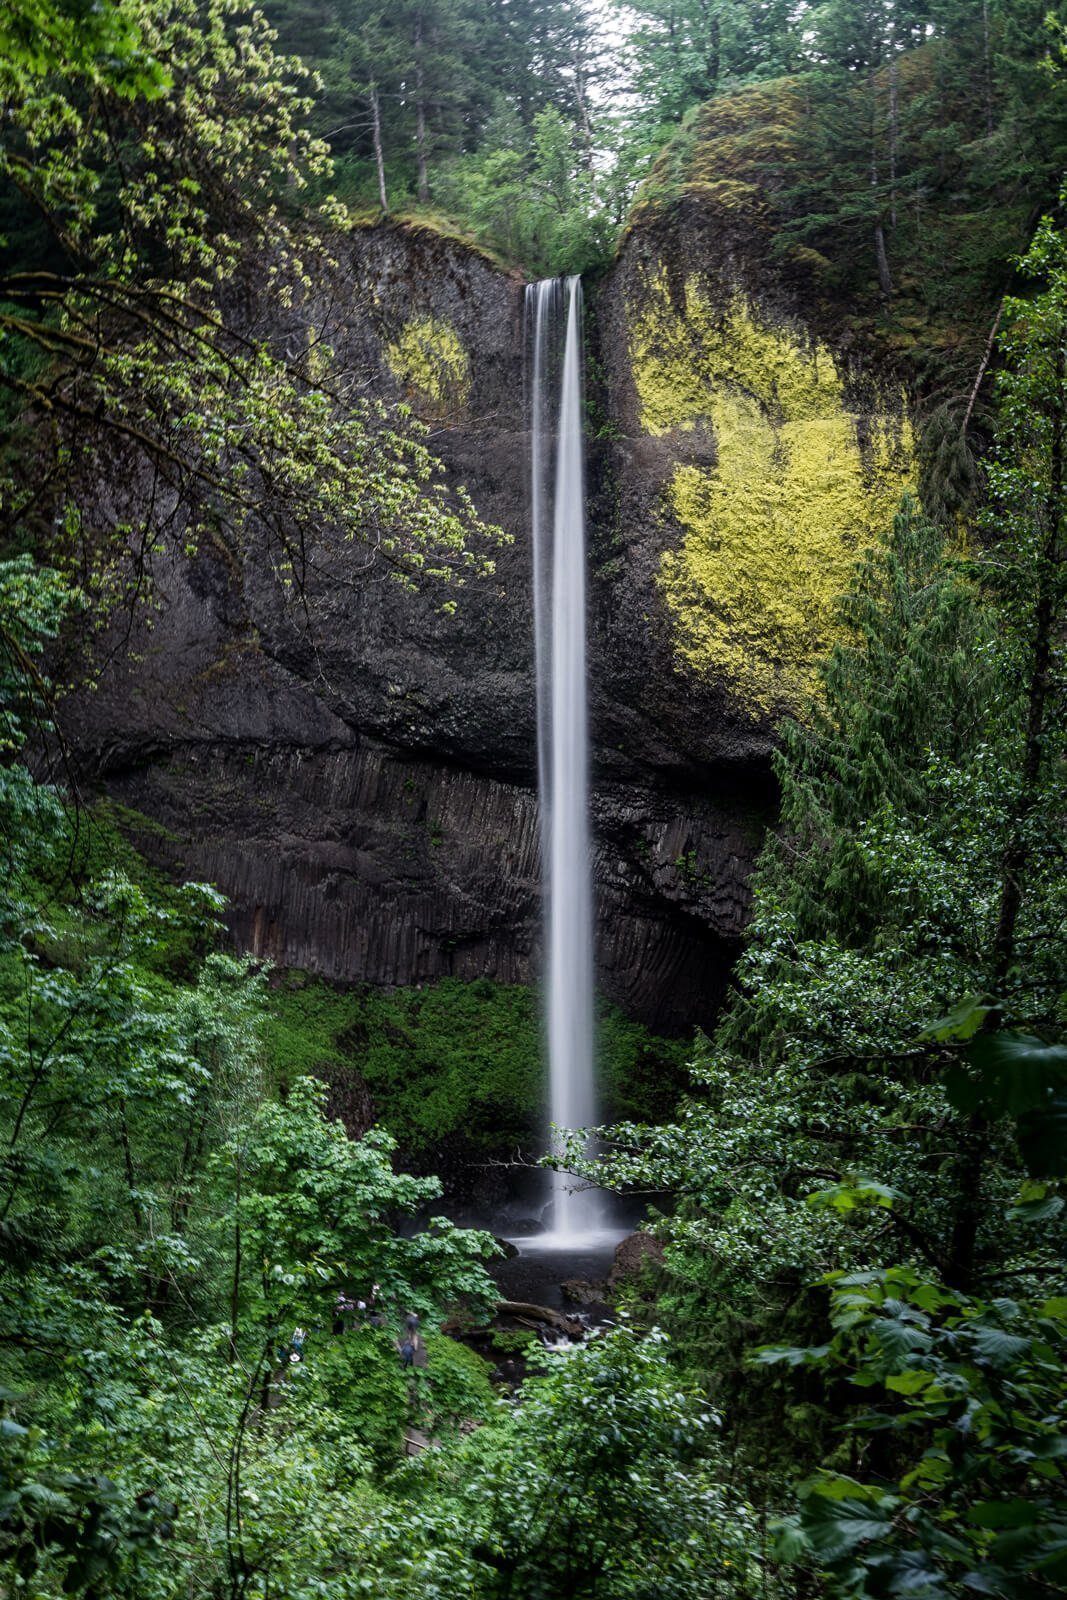 Latourell Falls is one of the most photogenic Oregon waterfalls.